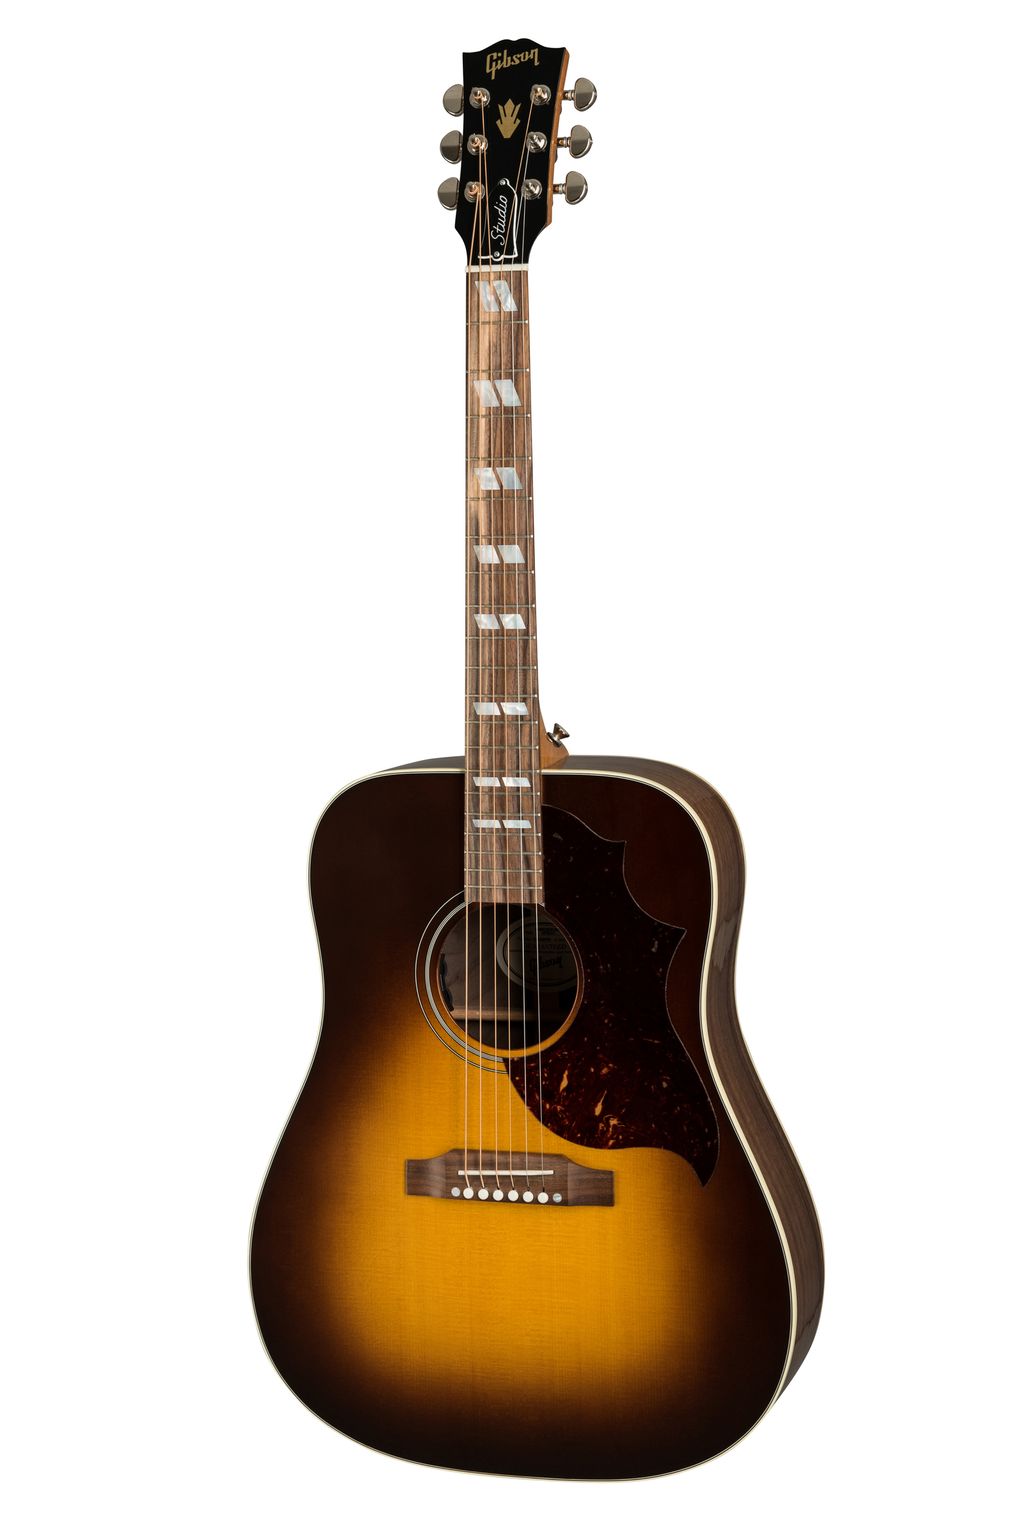 __static.gibson.com_product-images_Acoustic_ACC4YT544_Walnut_Burst_MCSSHSWLWB_front